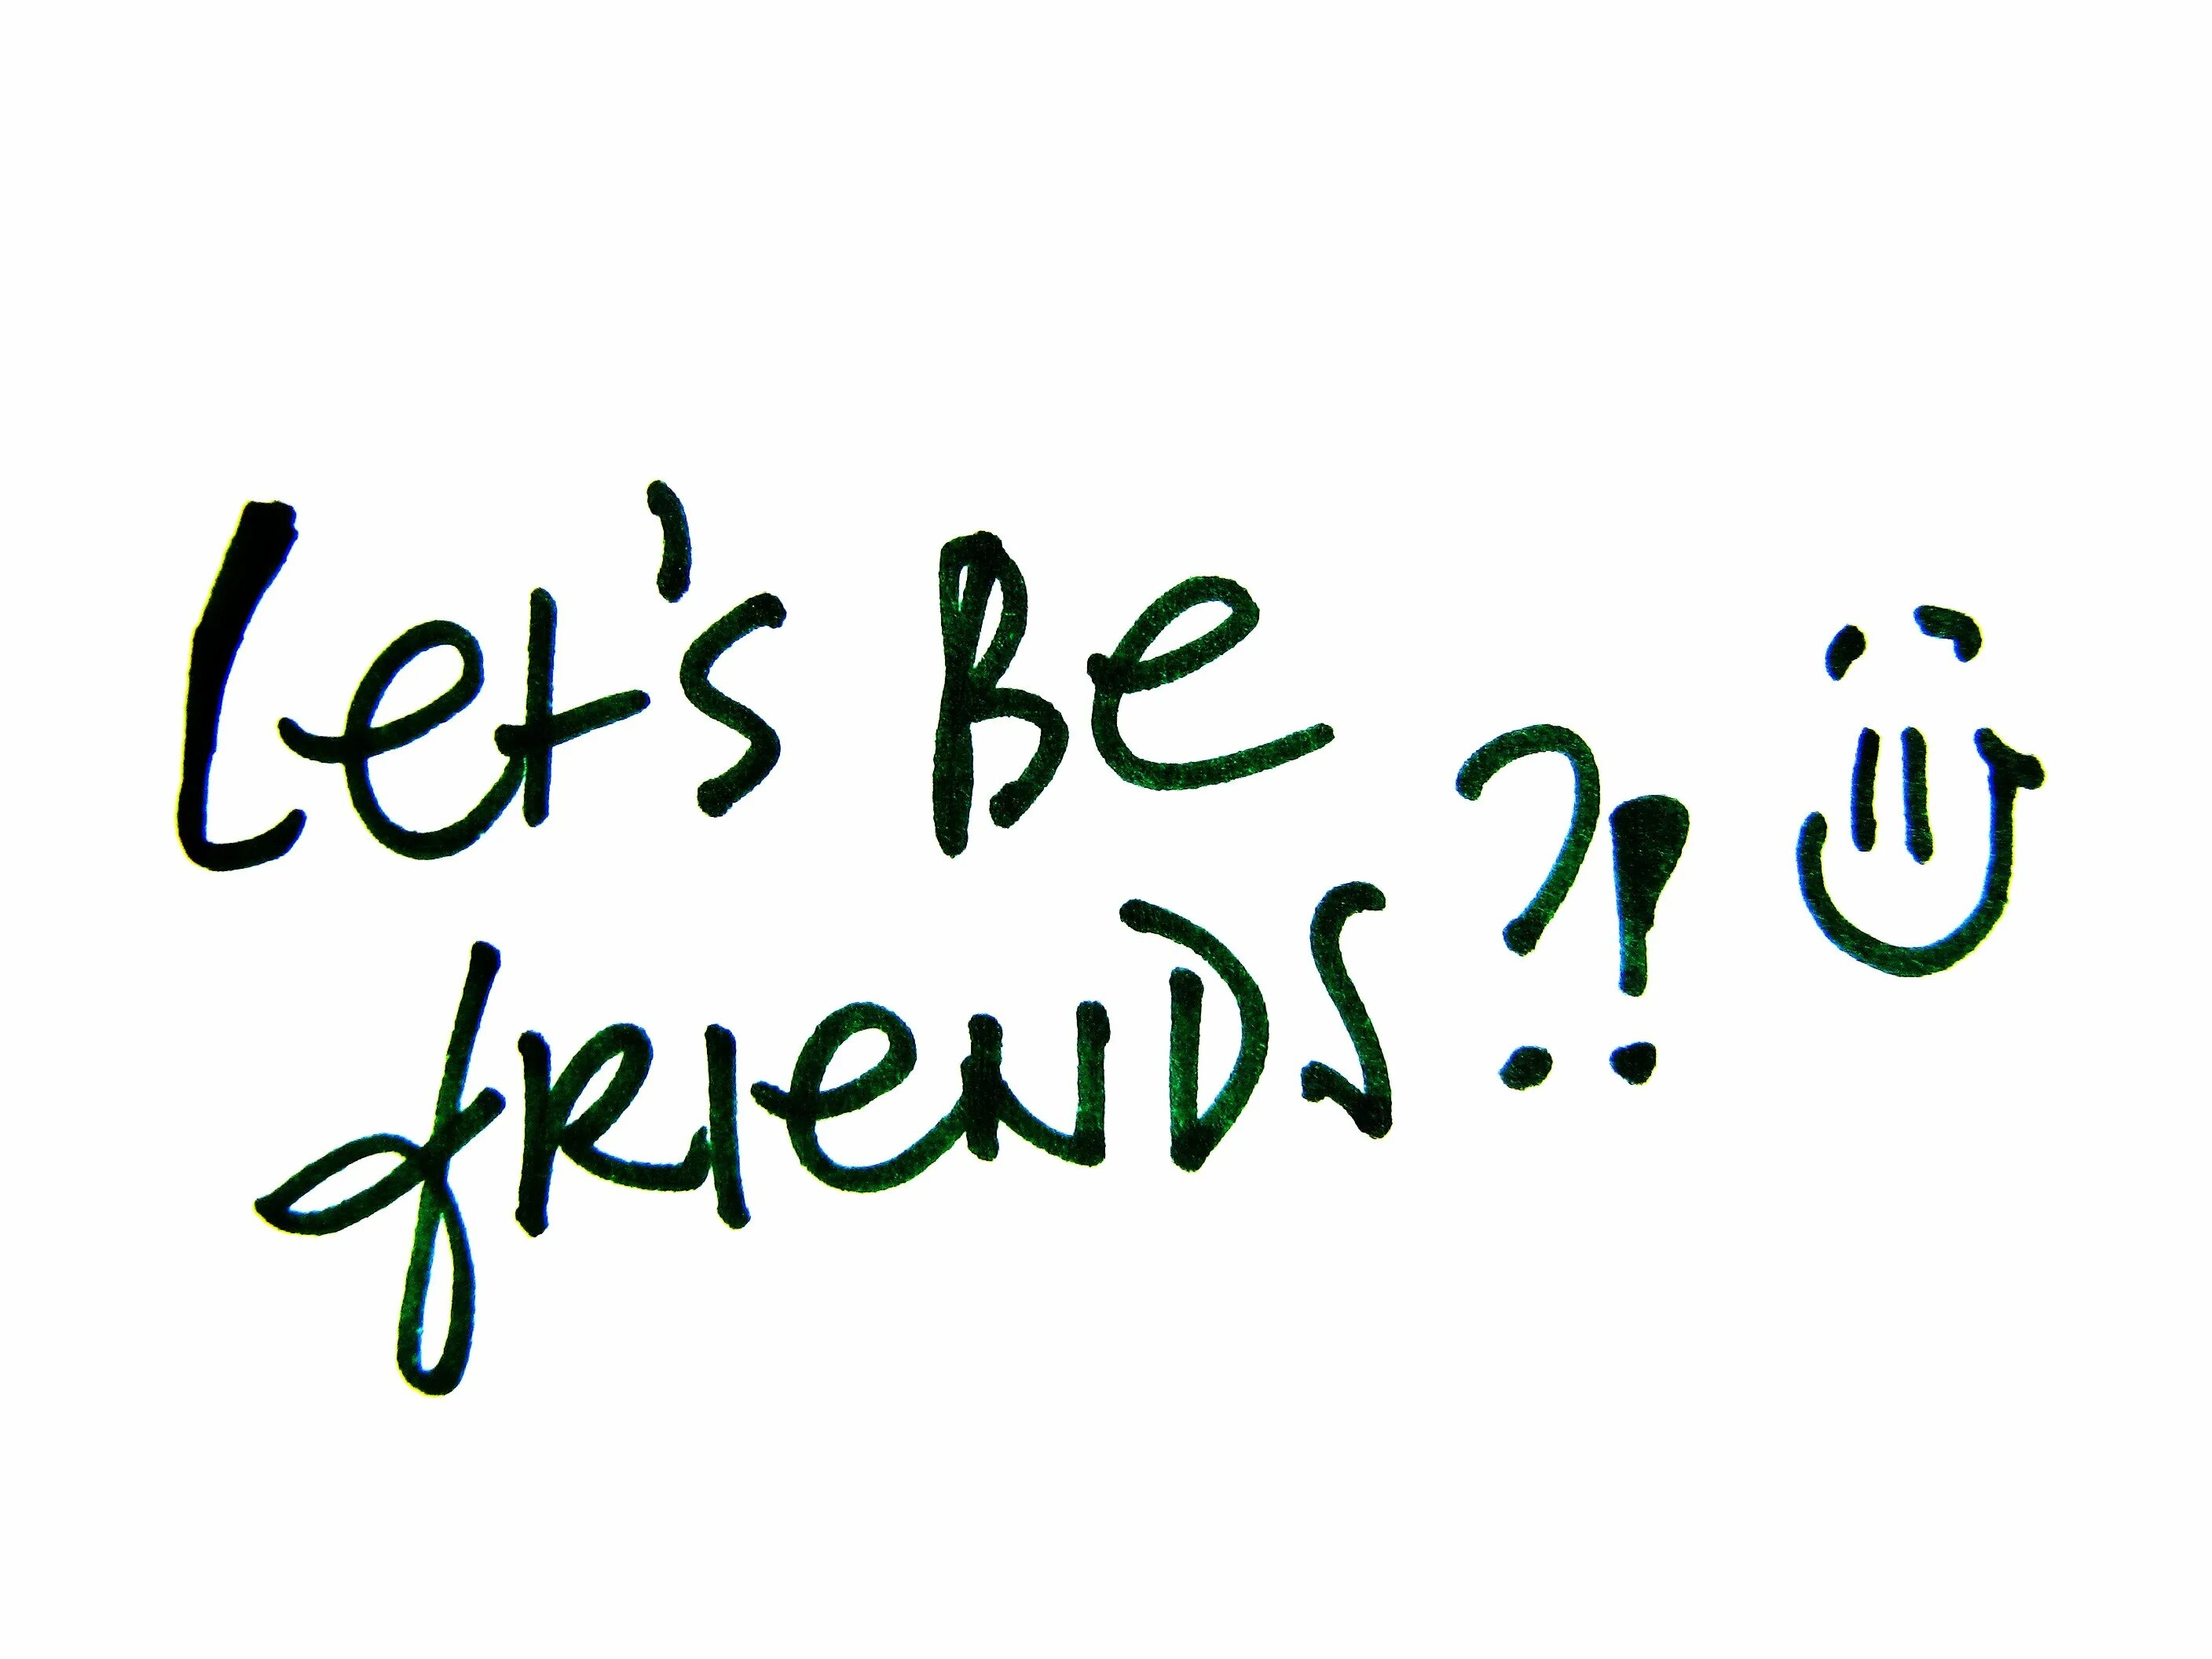 Картинки Let's be friends. Be a friend. Картинка be a friend. Let`s make friends.